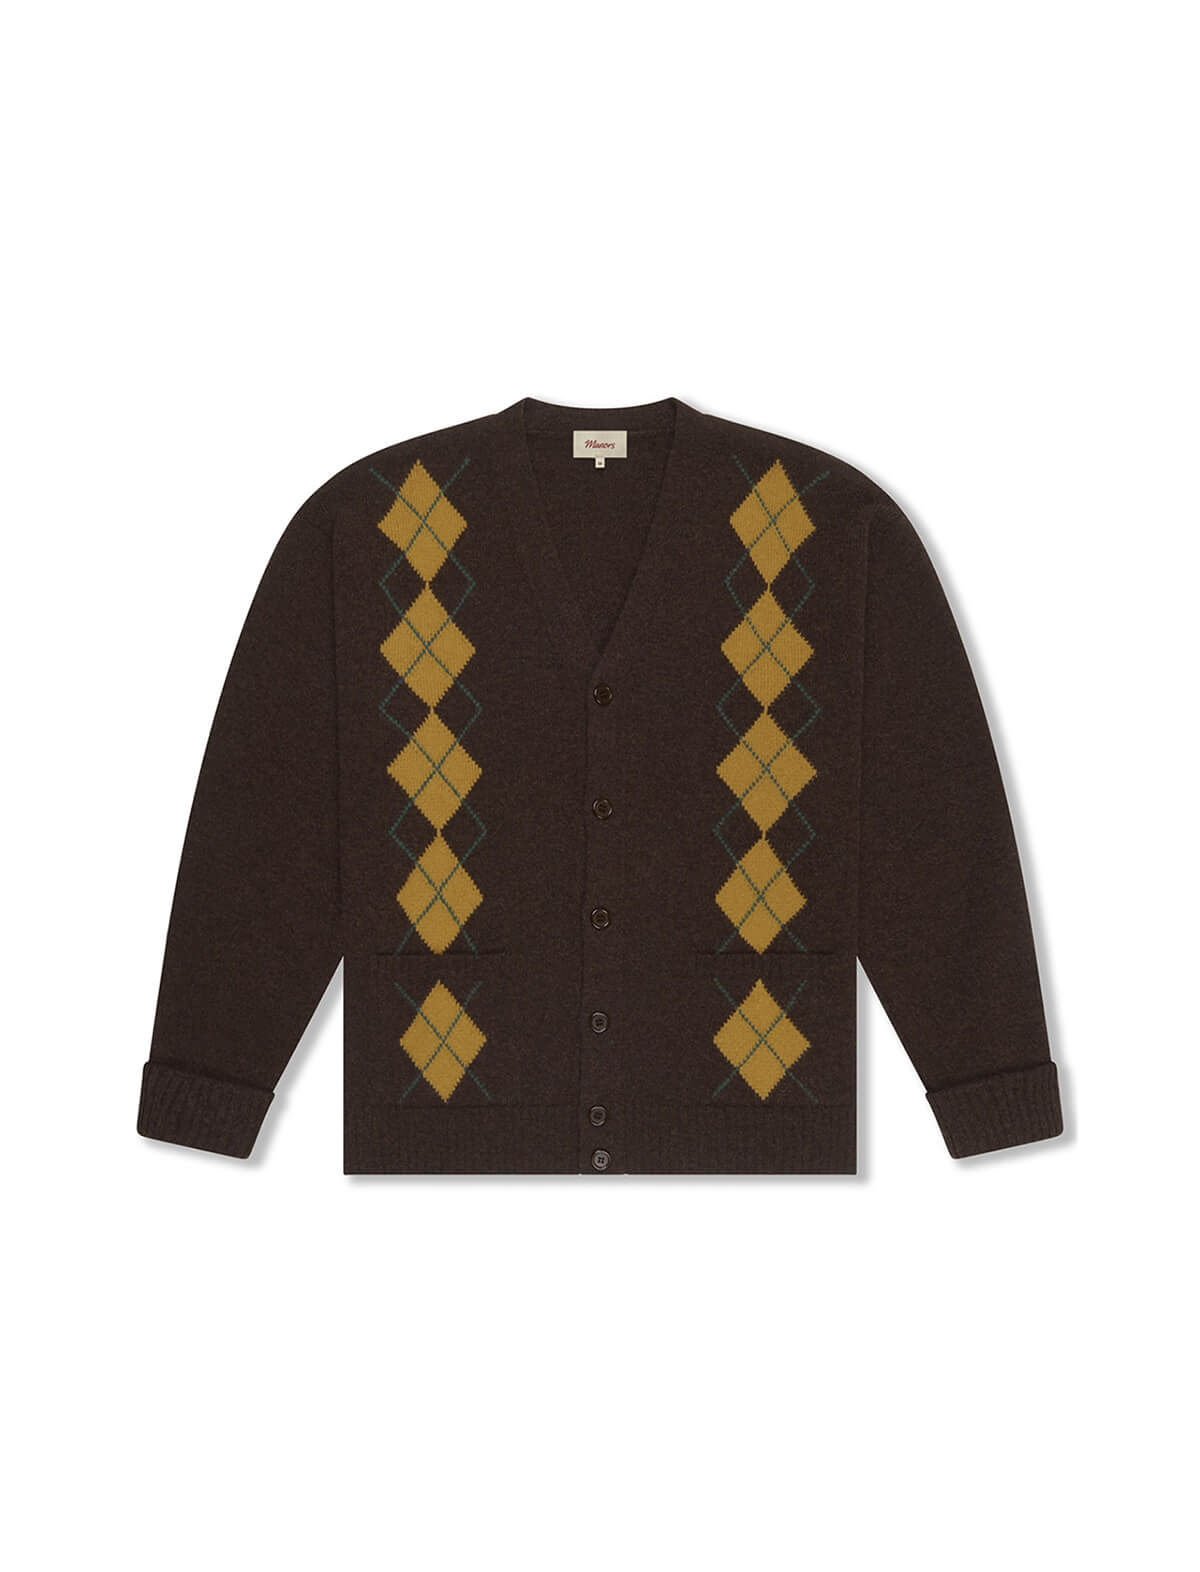 MANORS GOLF Striped Argyle Cardigan in Brown/Gold